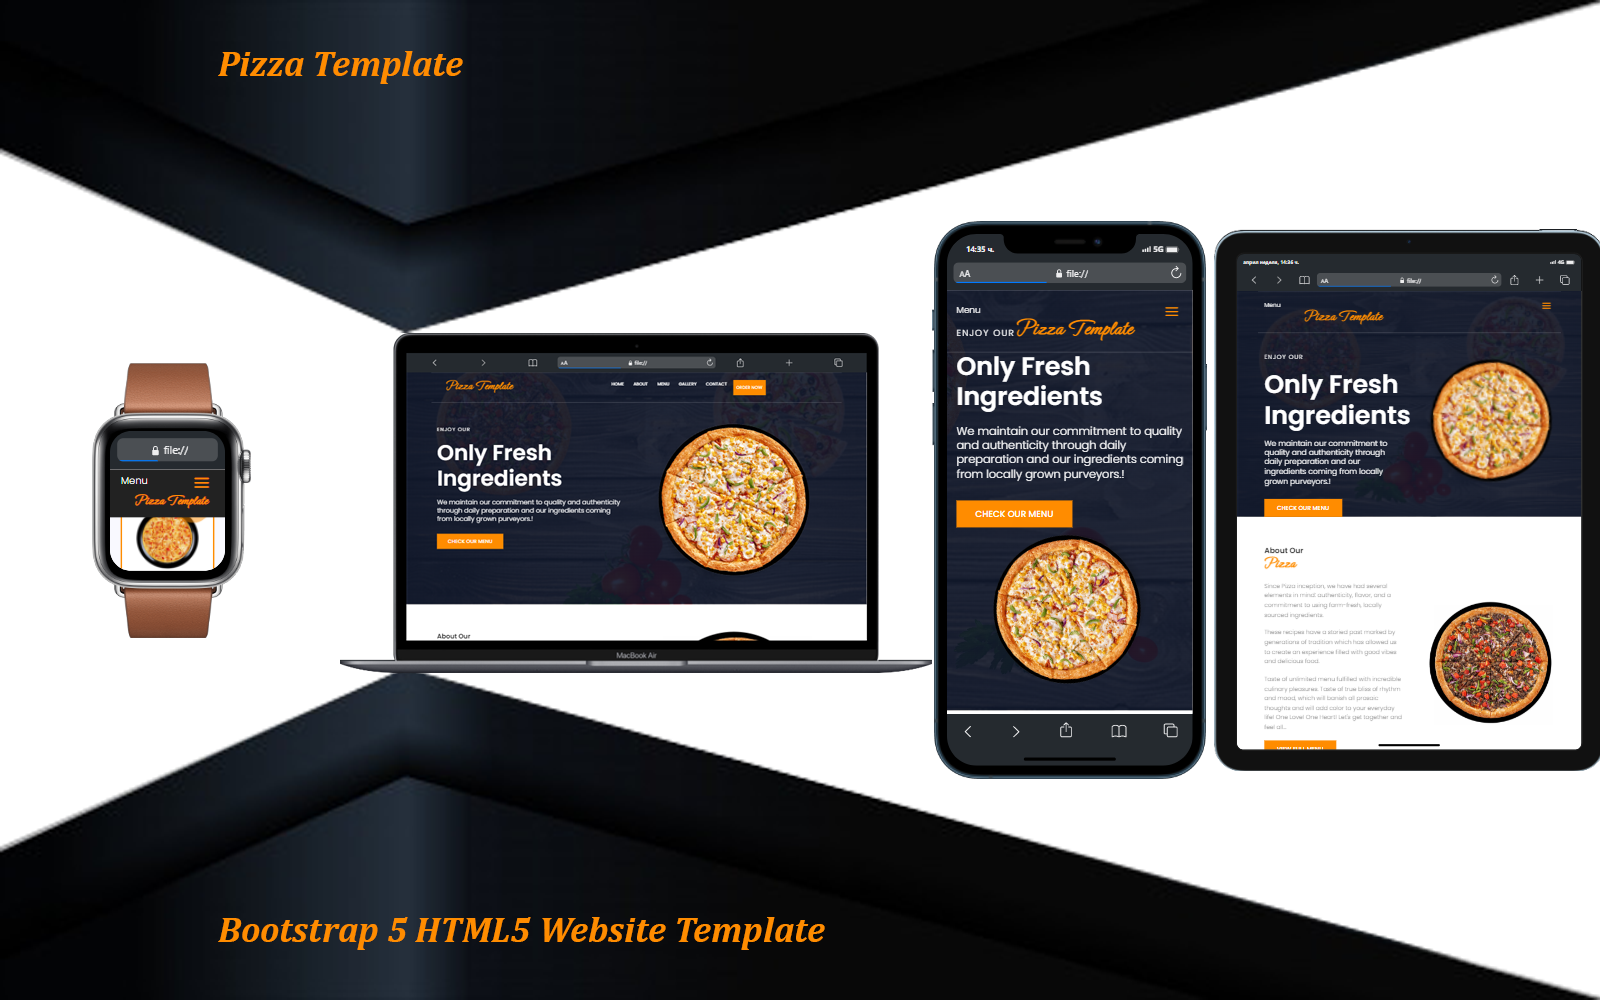 Pizza Template - Bootstrap 5 HTML5 Website Template